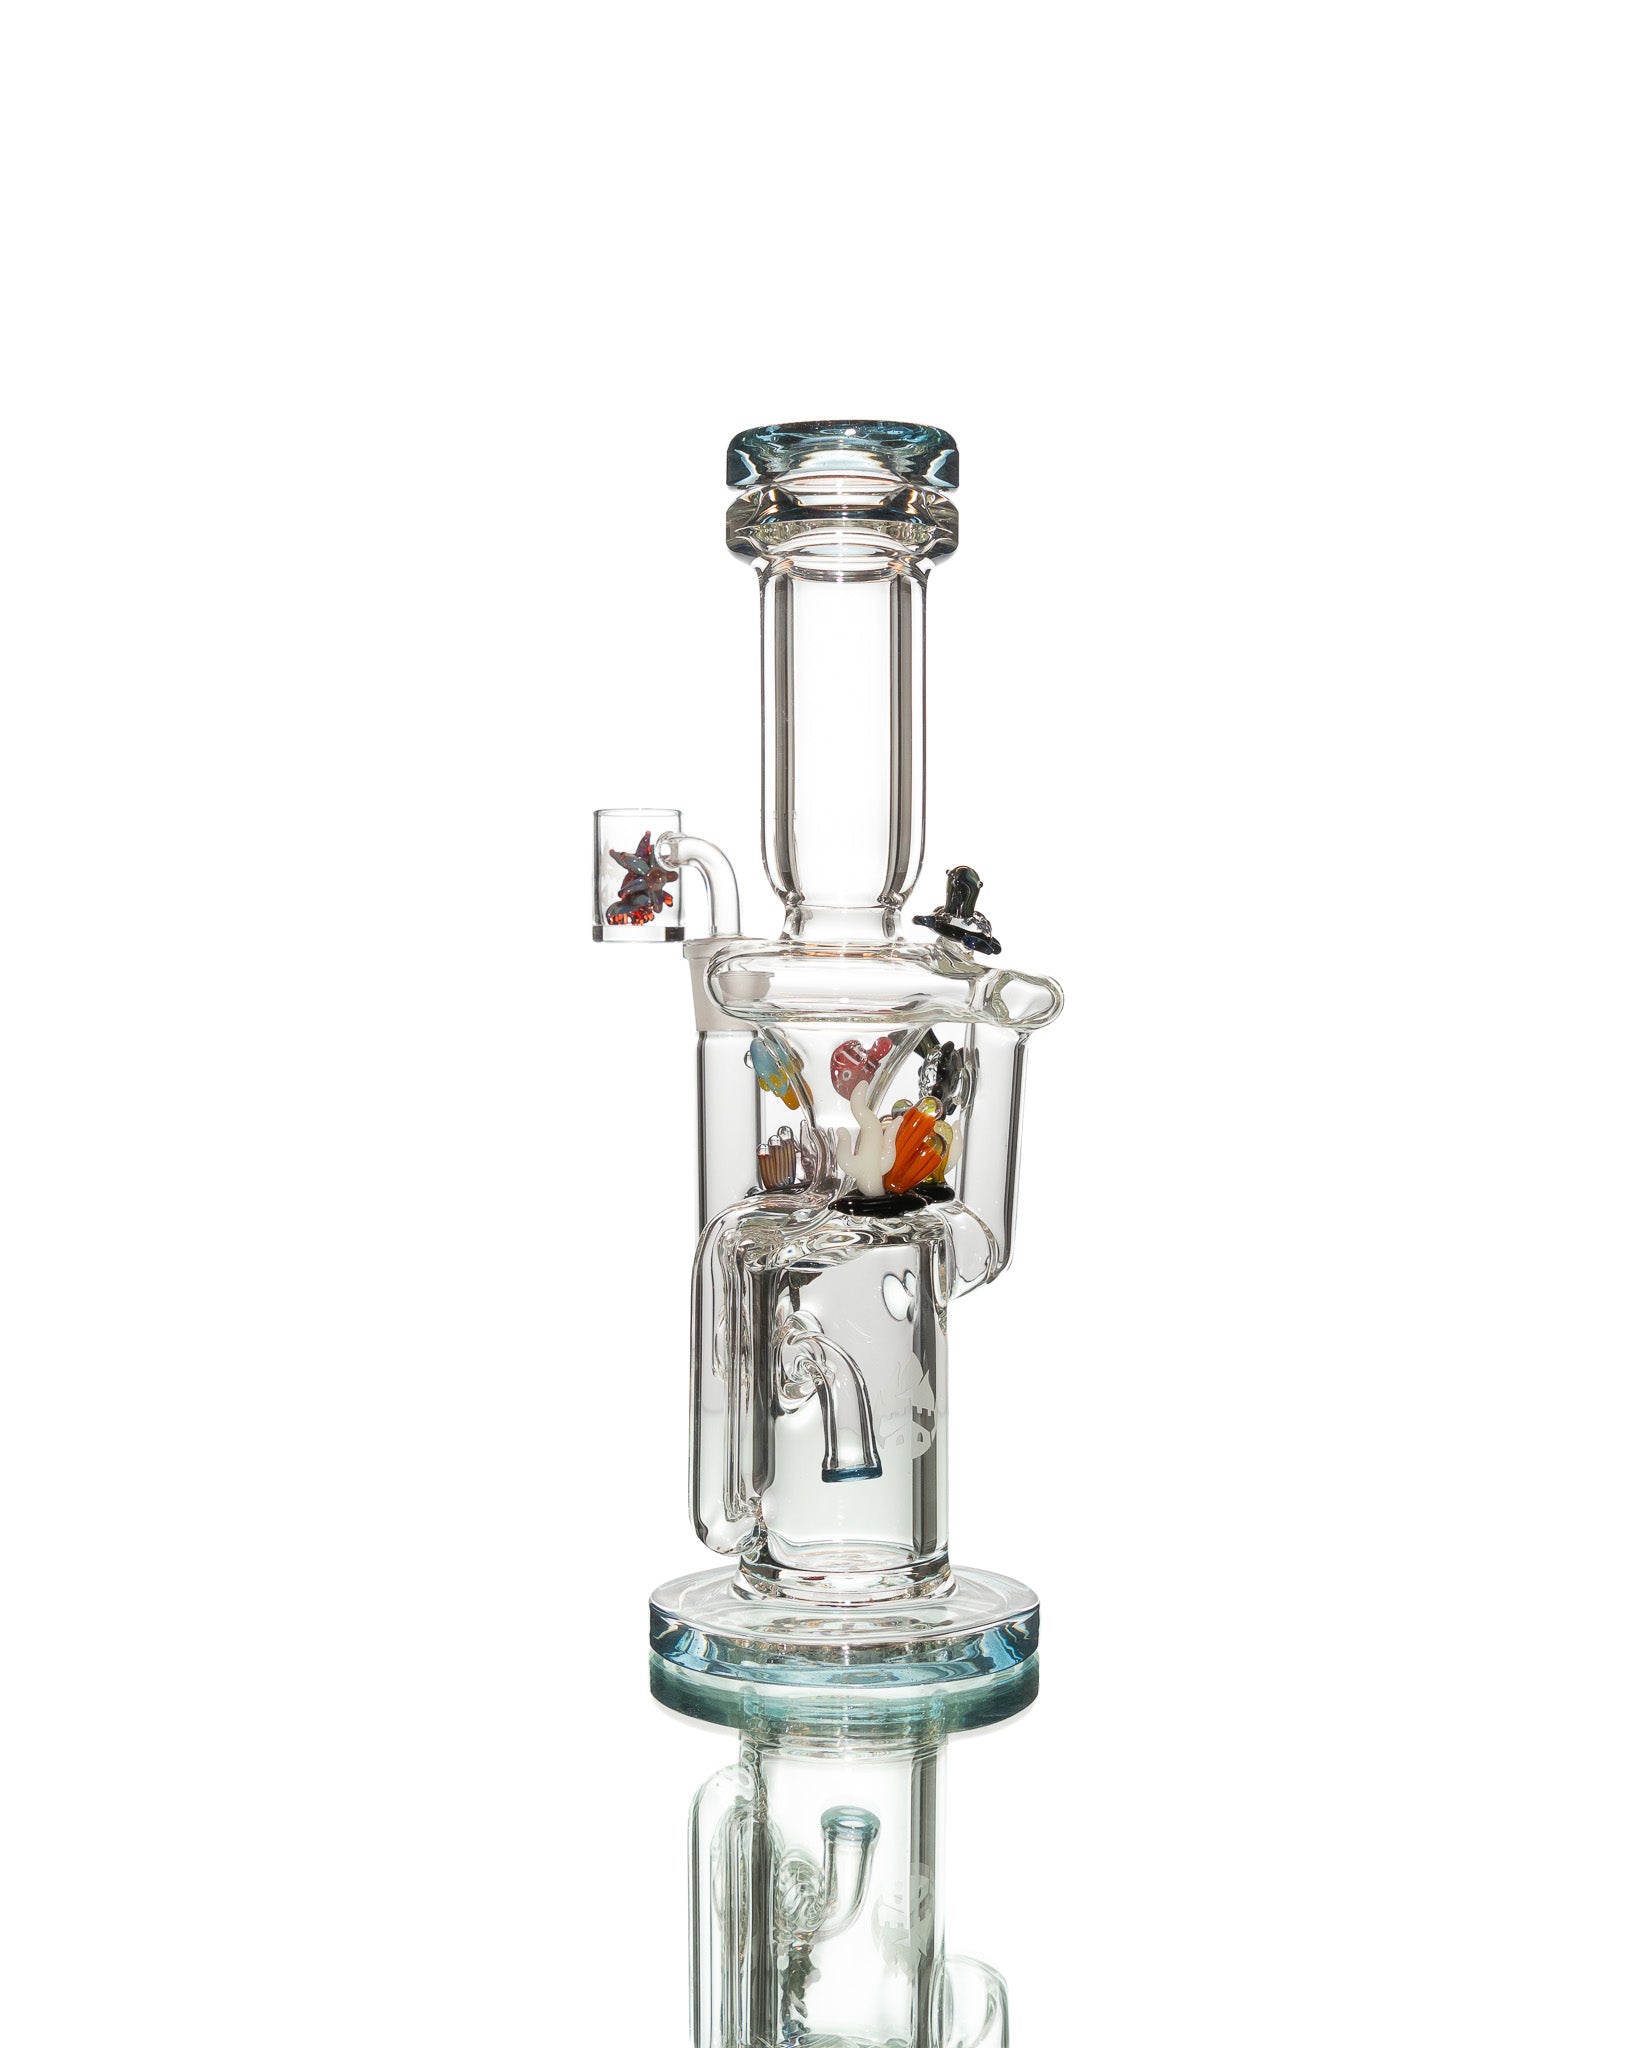 Empire Glassworks - "Under the Sea" Recycler